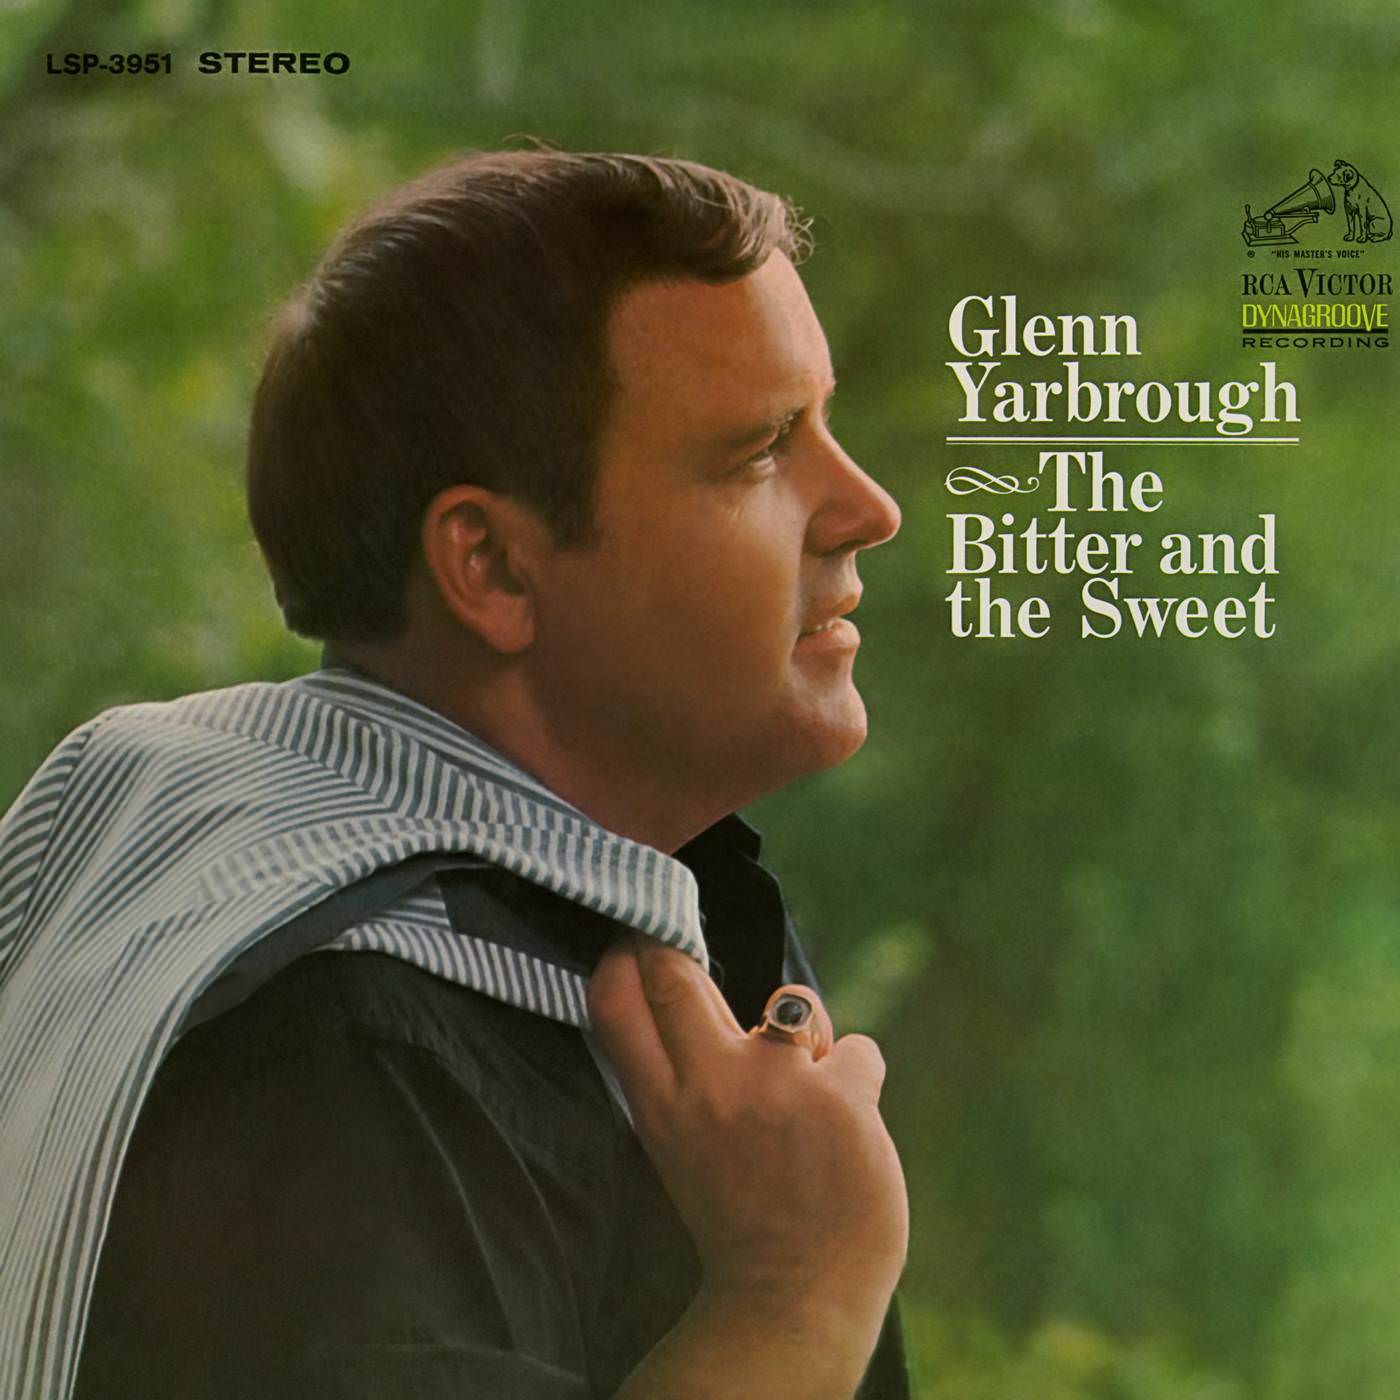 Glenn Yarbrough – The Bitter And The Sweet (1968/2018) [AcousticSounds FLAC 24bit/192kHz]